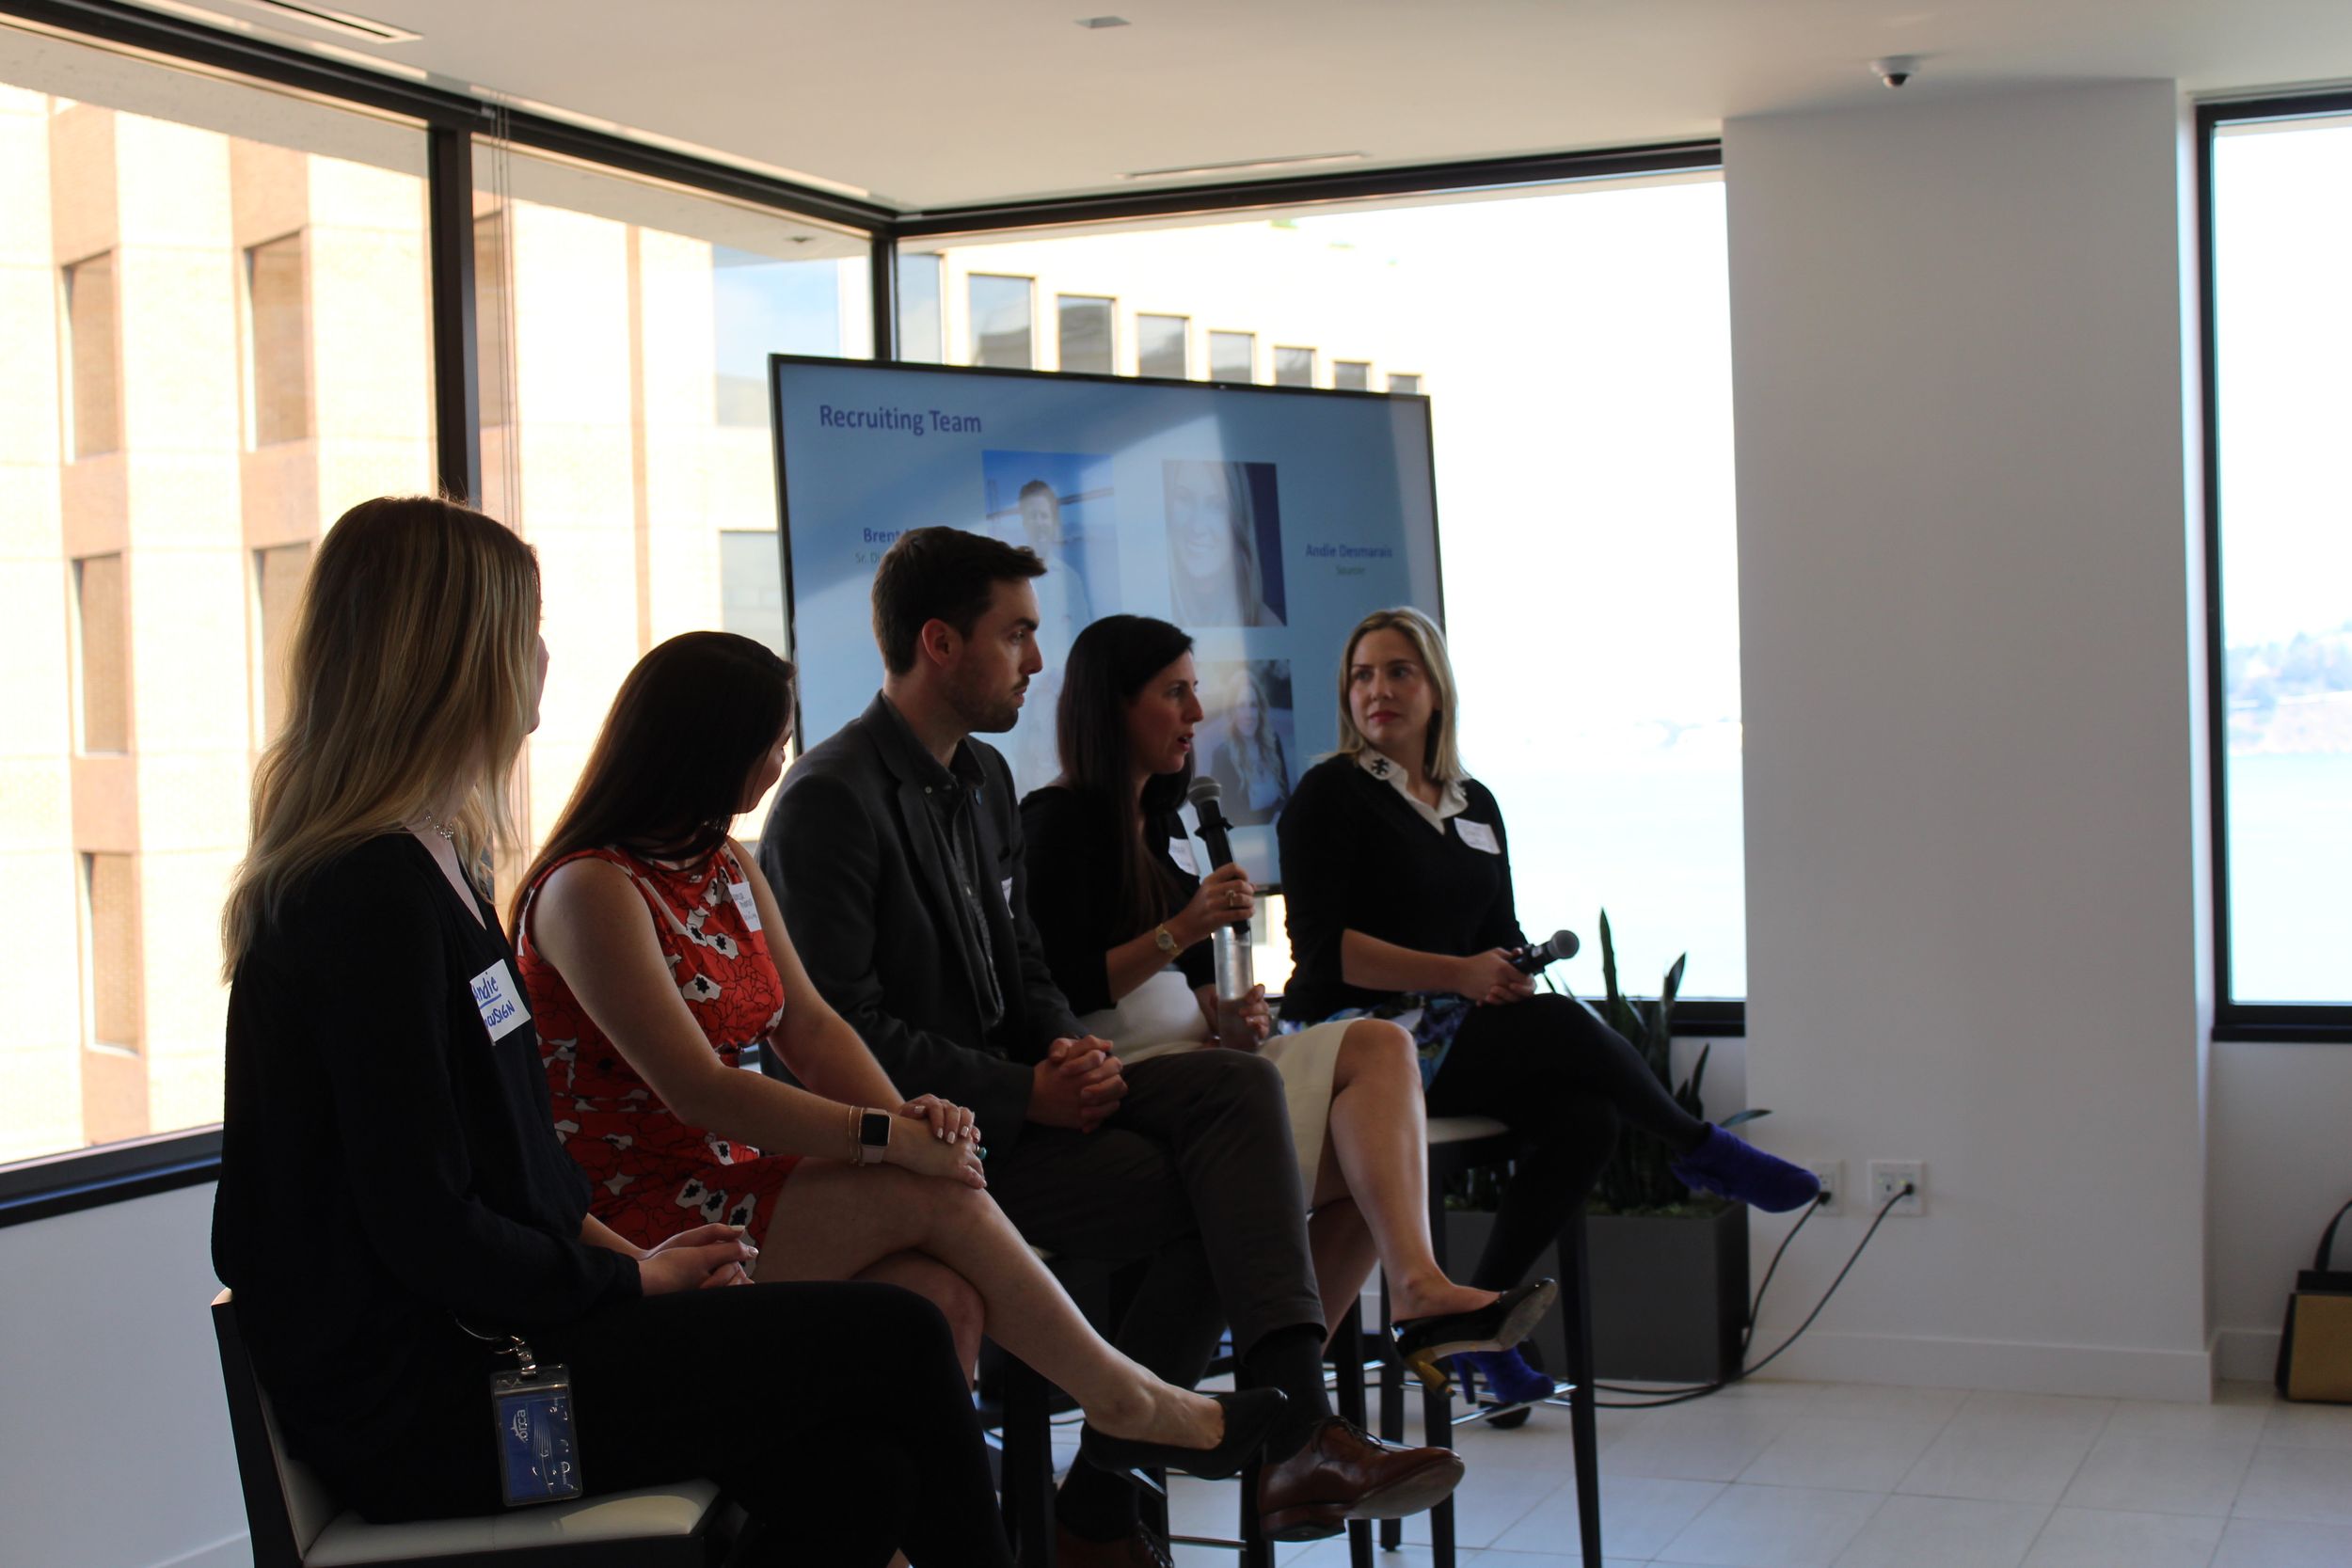 An Inside Look at Our Event with DocuSign